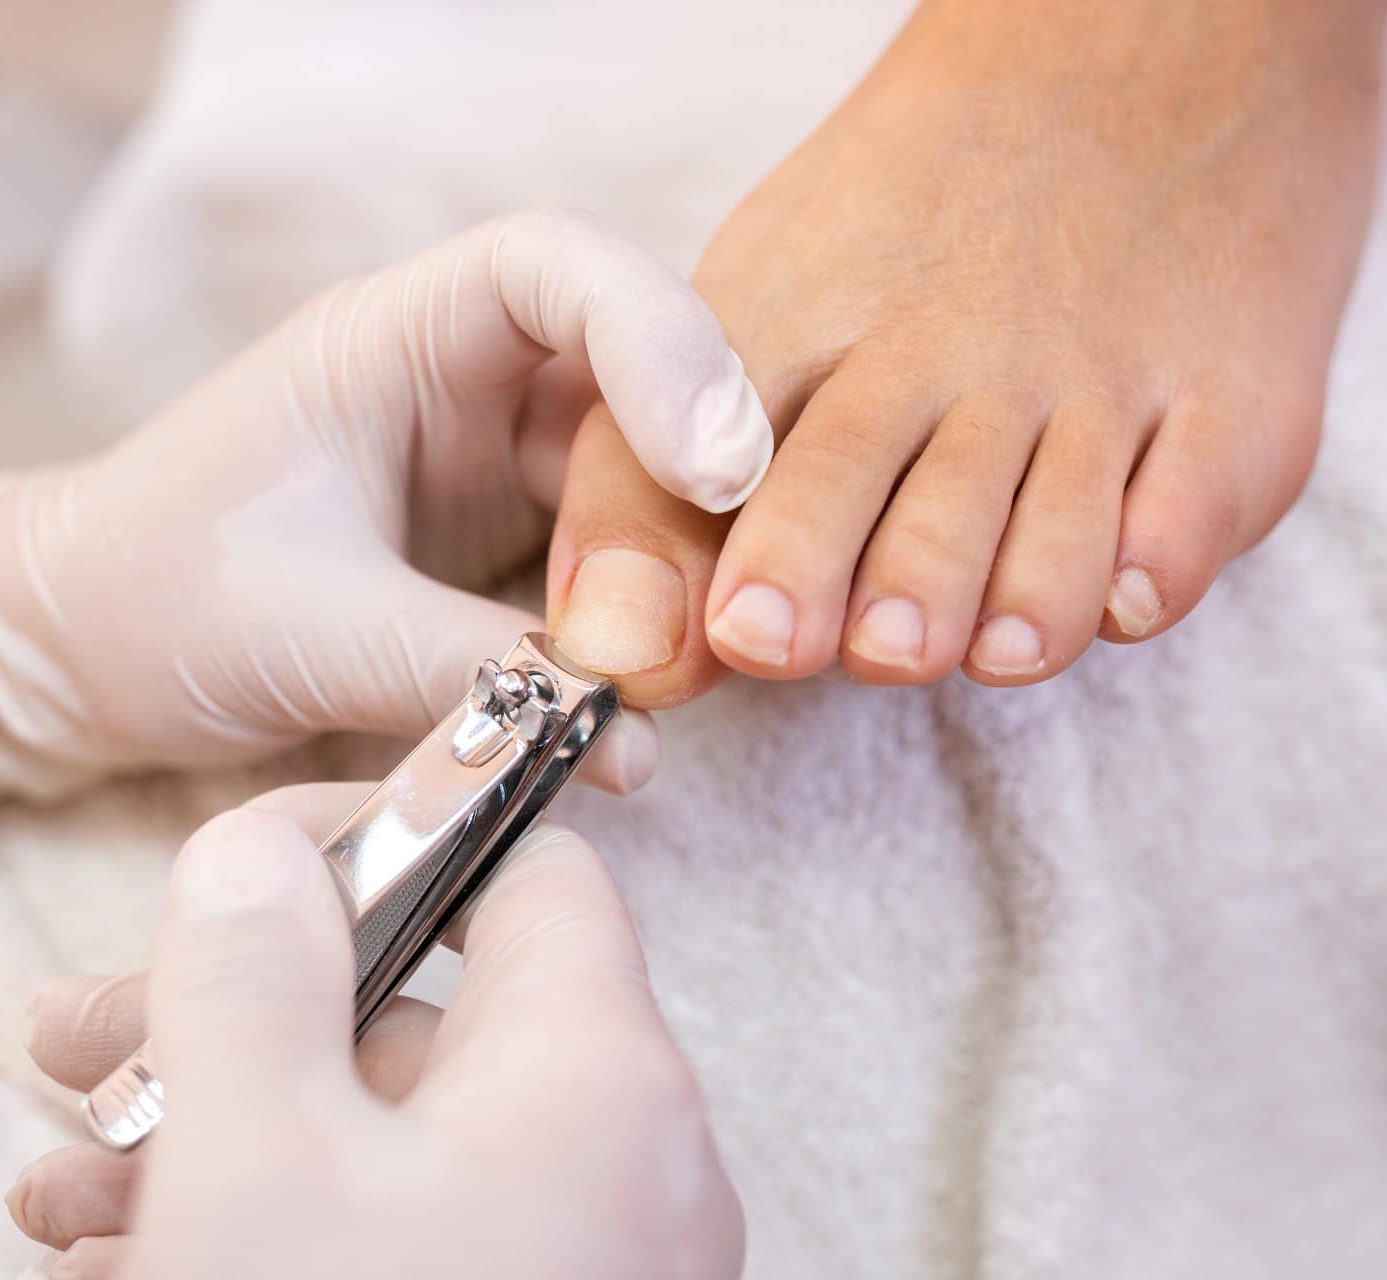 person getting their toenail cut at a podiatry office